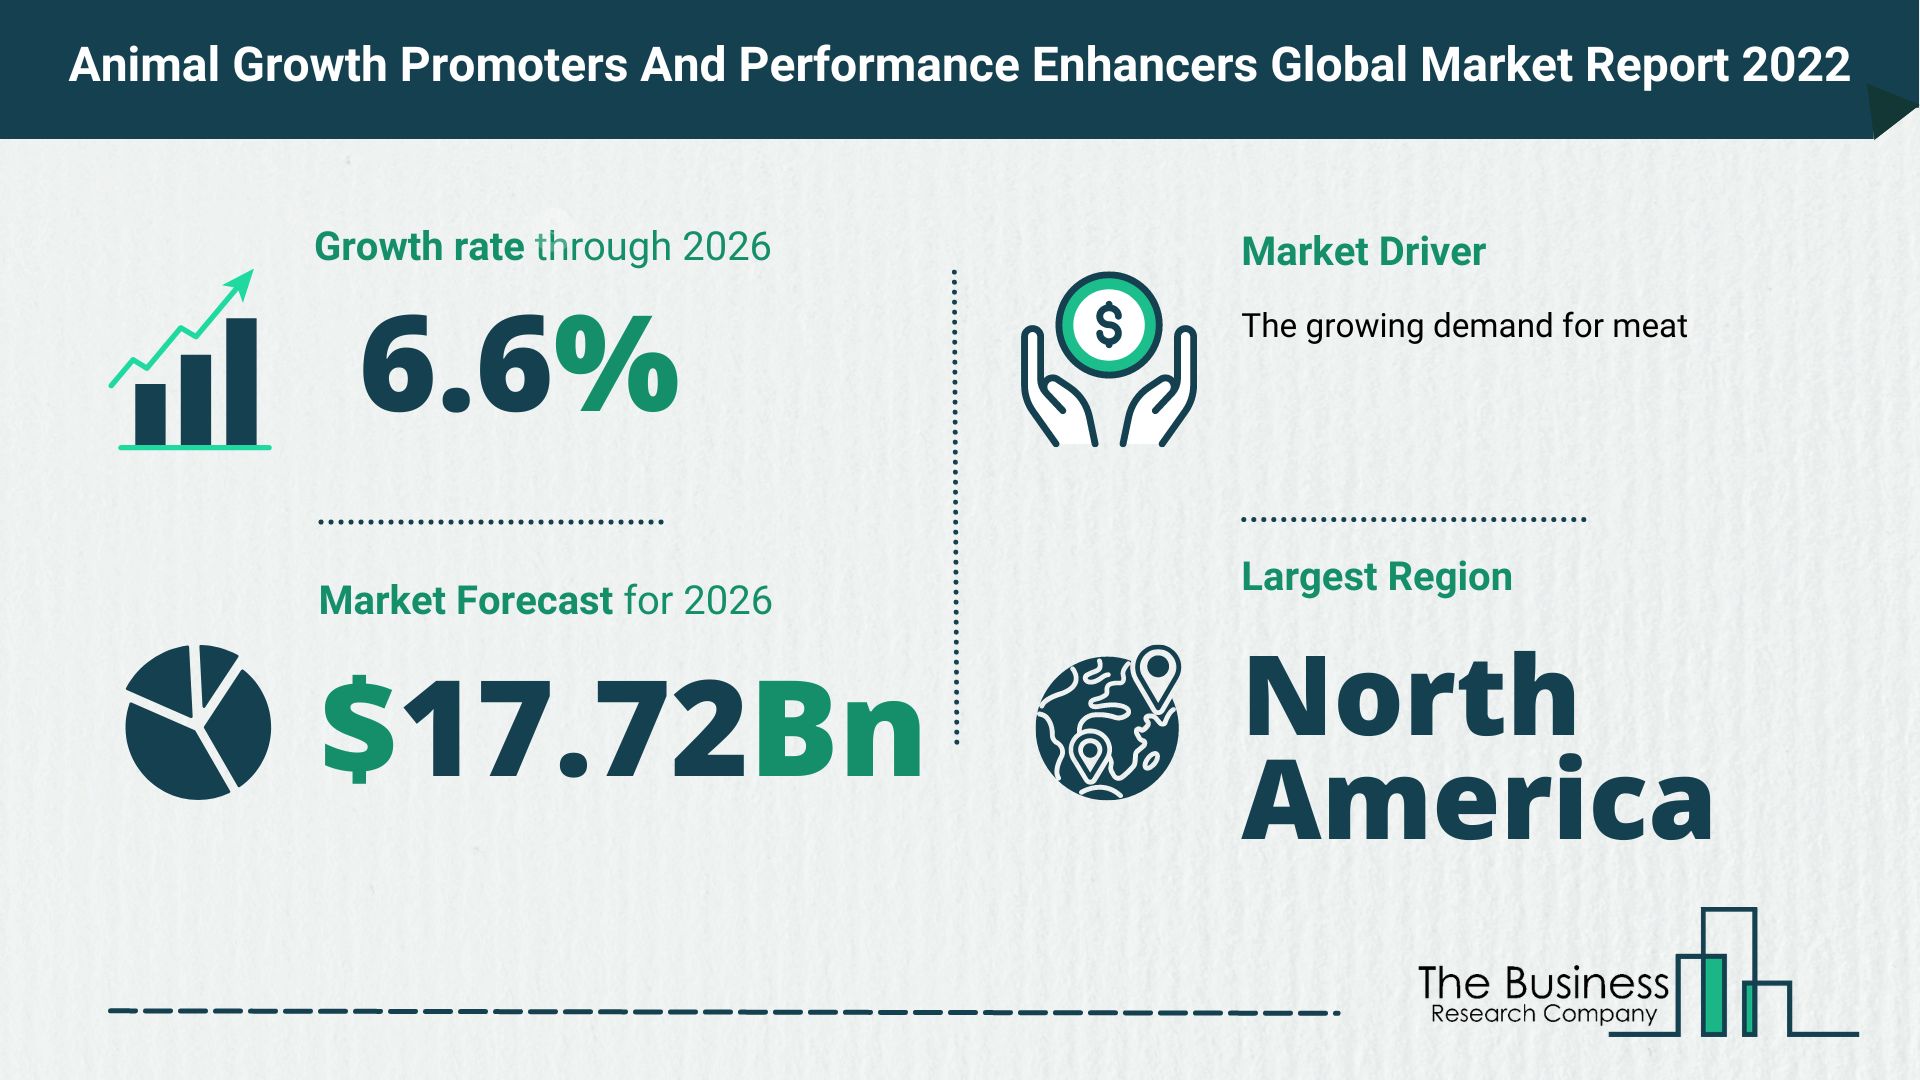 How Will The Animal Growth Promoters And Performance Enhancers Market Grow In 2022?